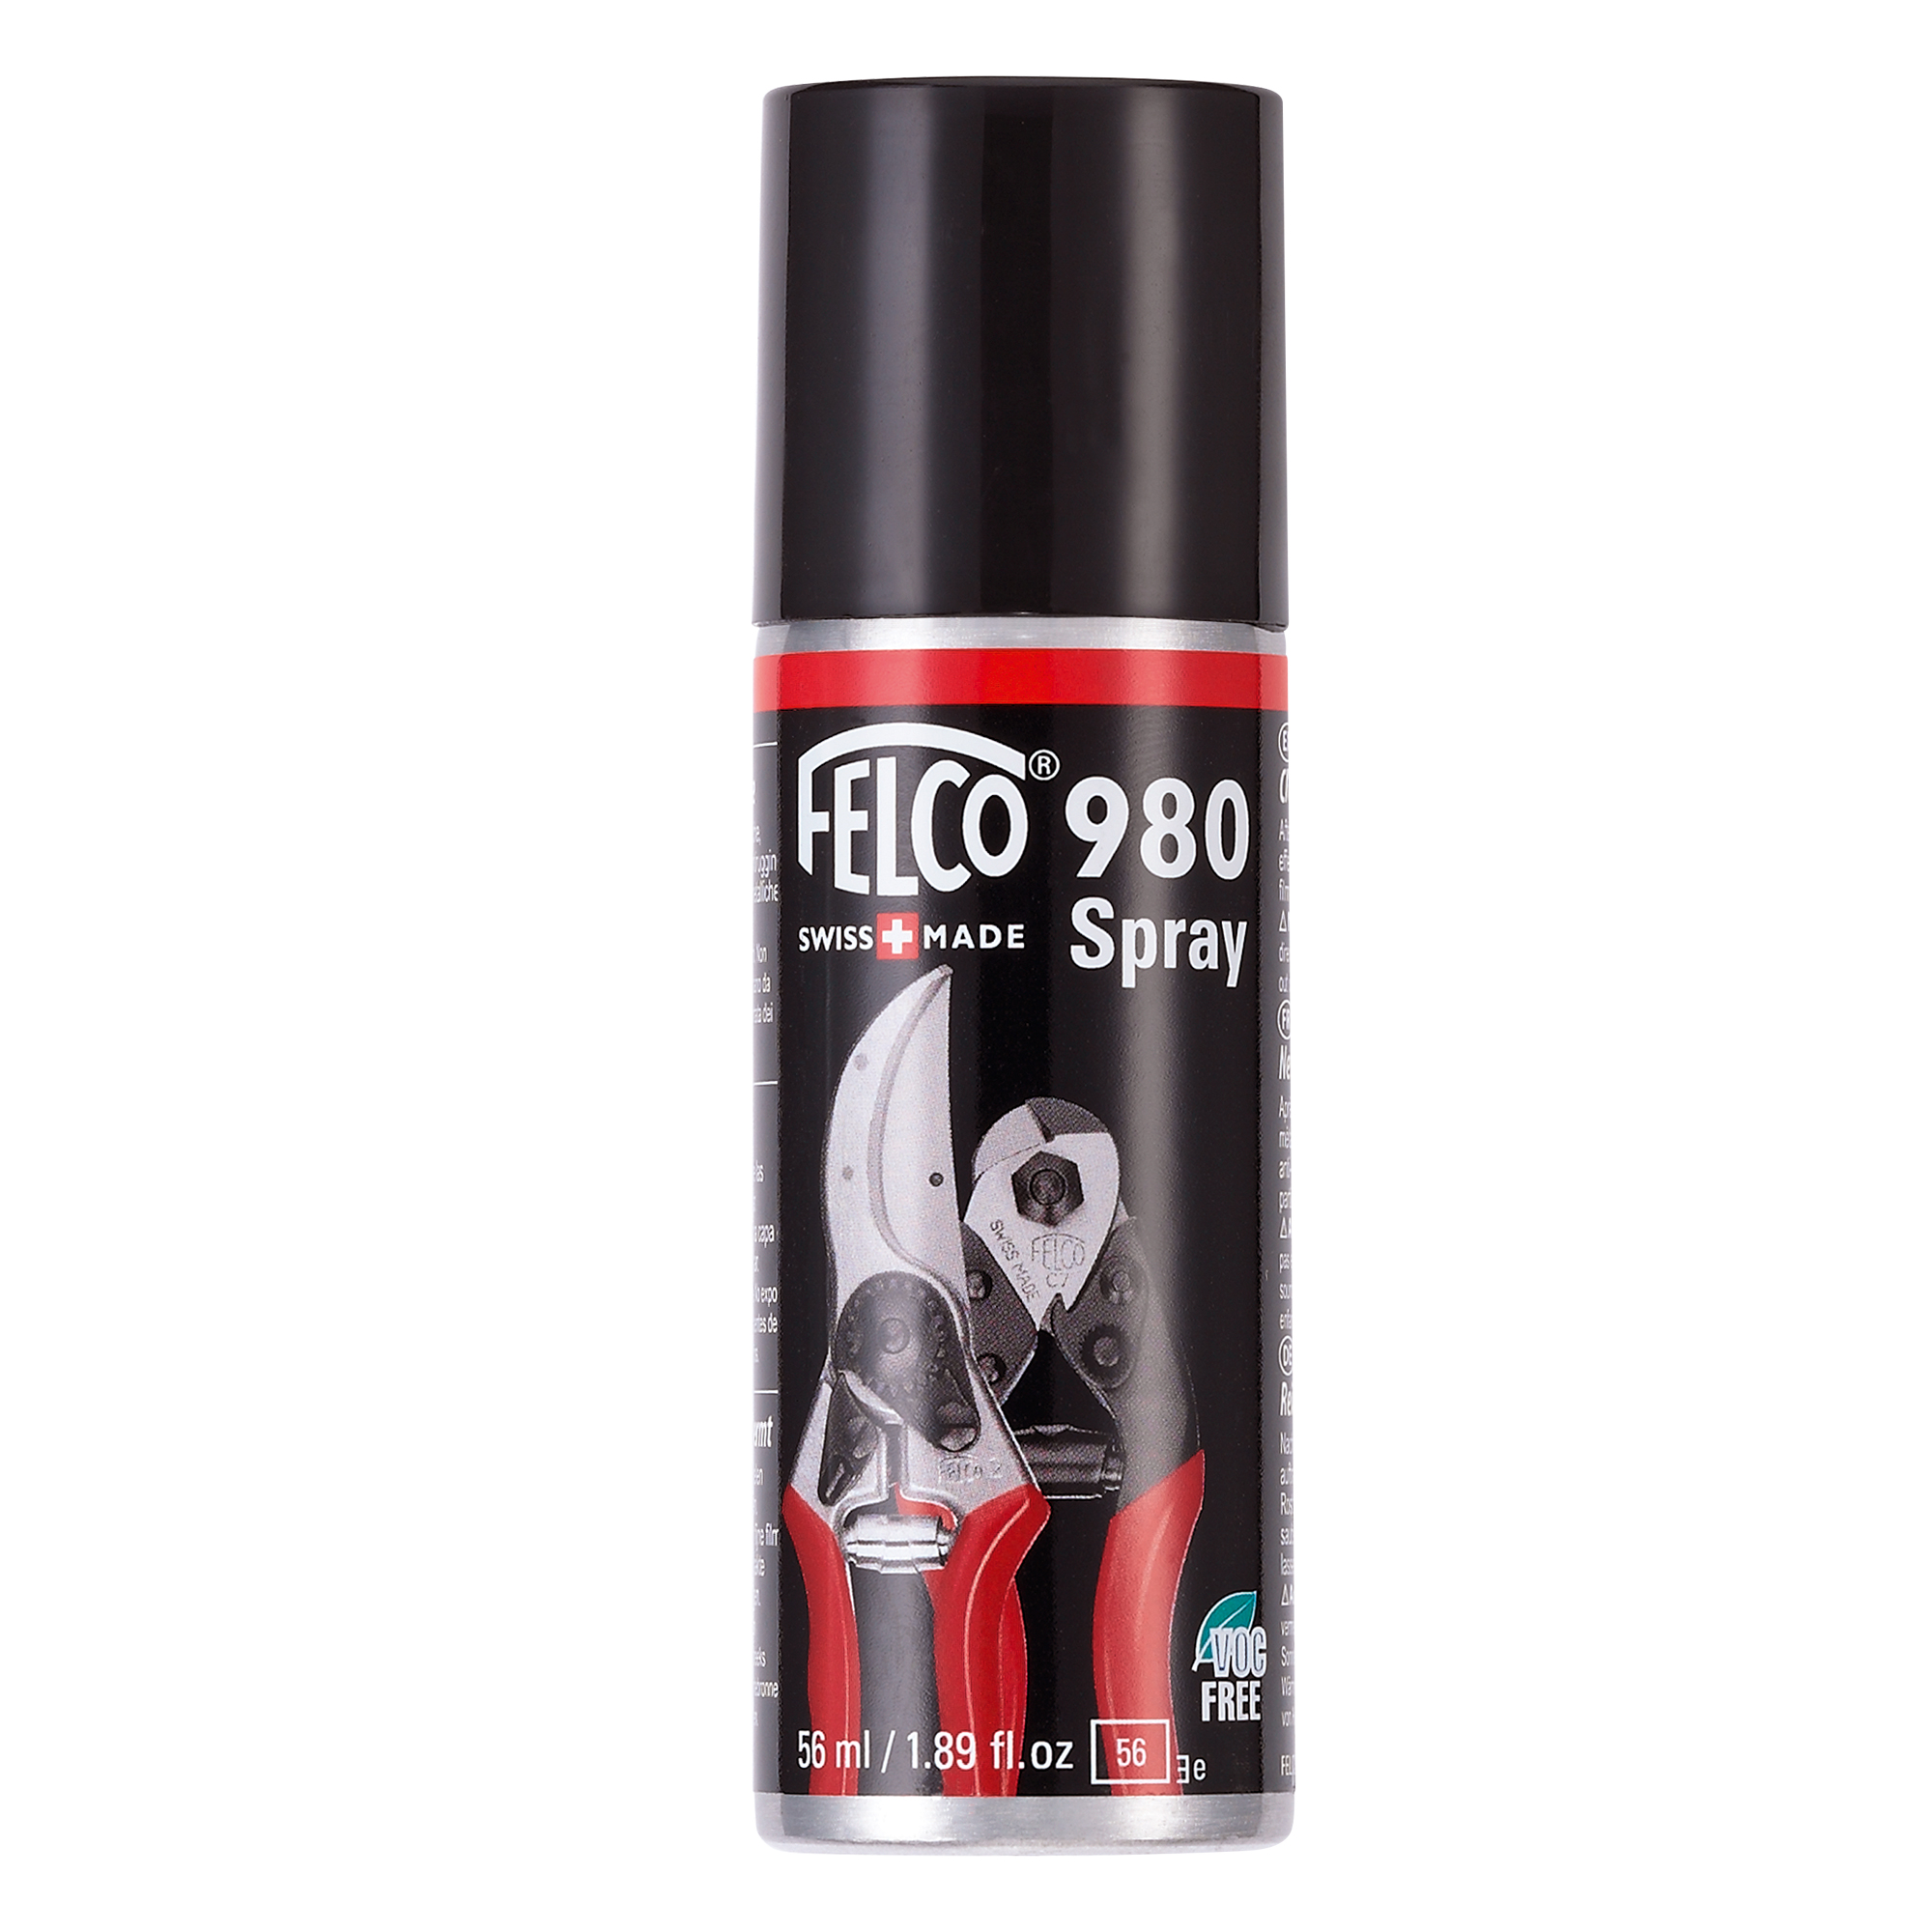 Felco spray without propellant